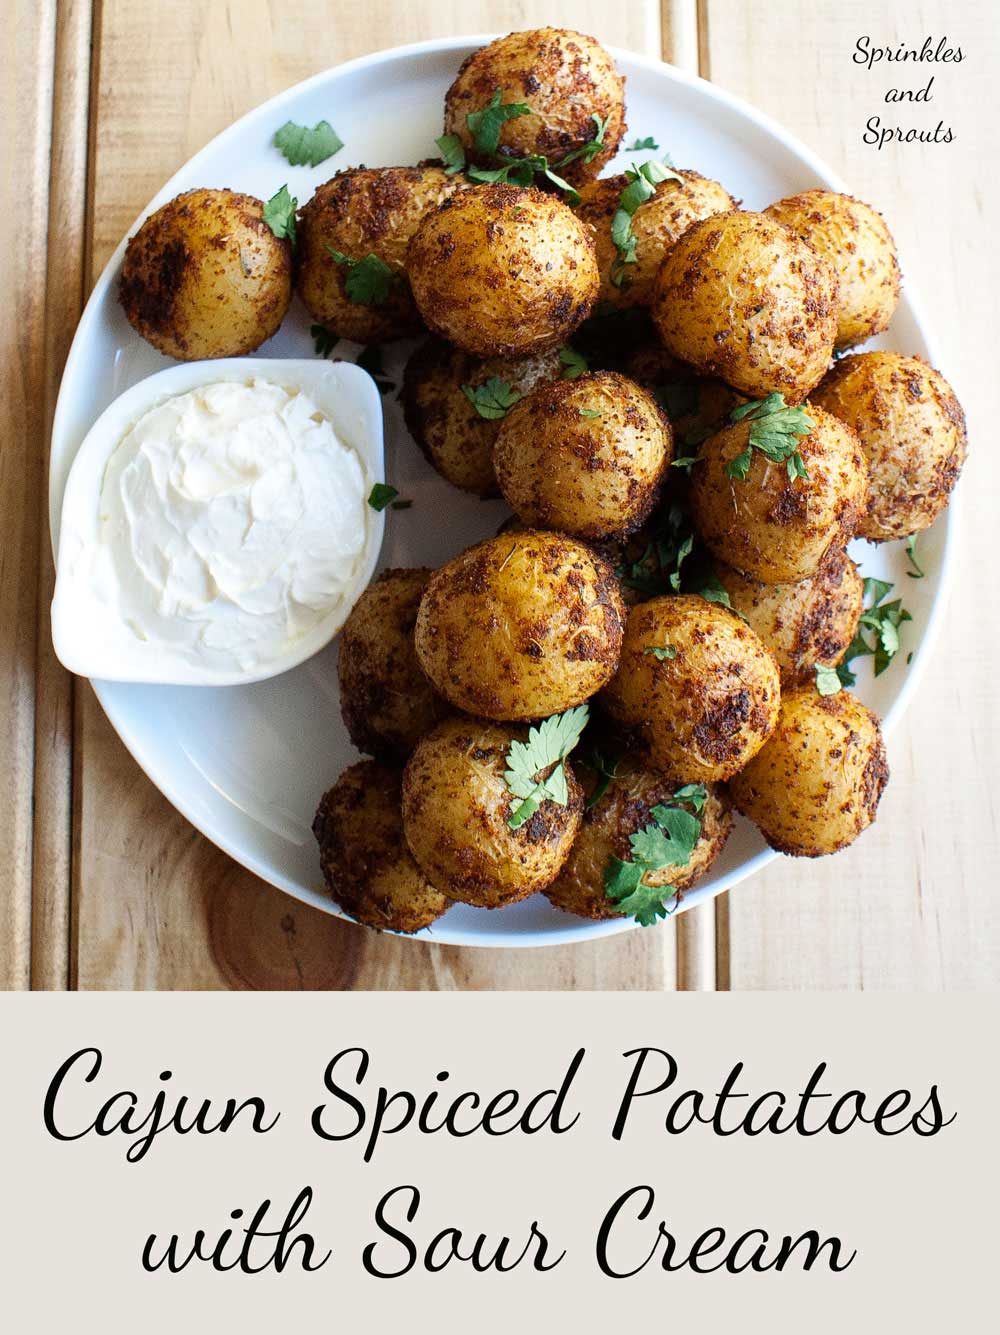 Cajun Spiced Potatoes. A simple and delicious side dish.